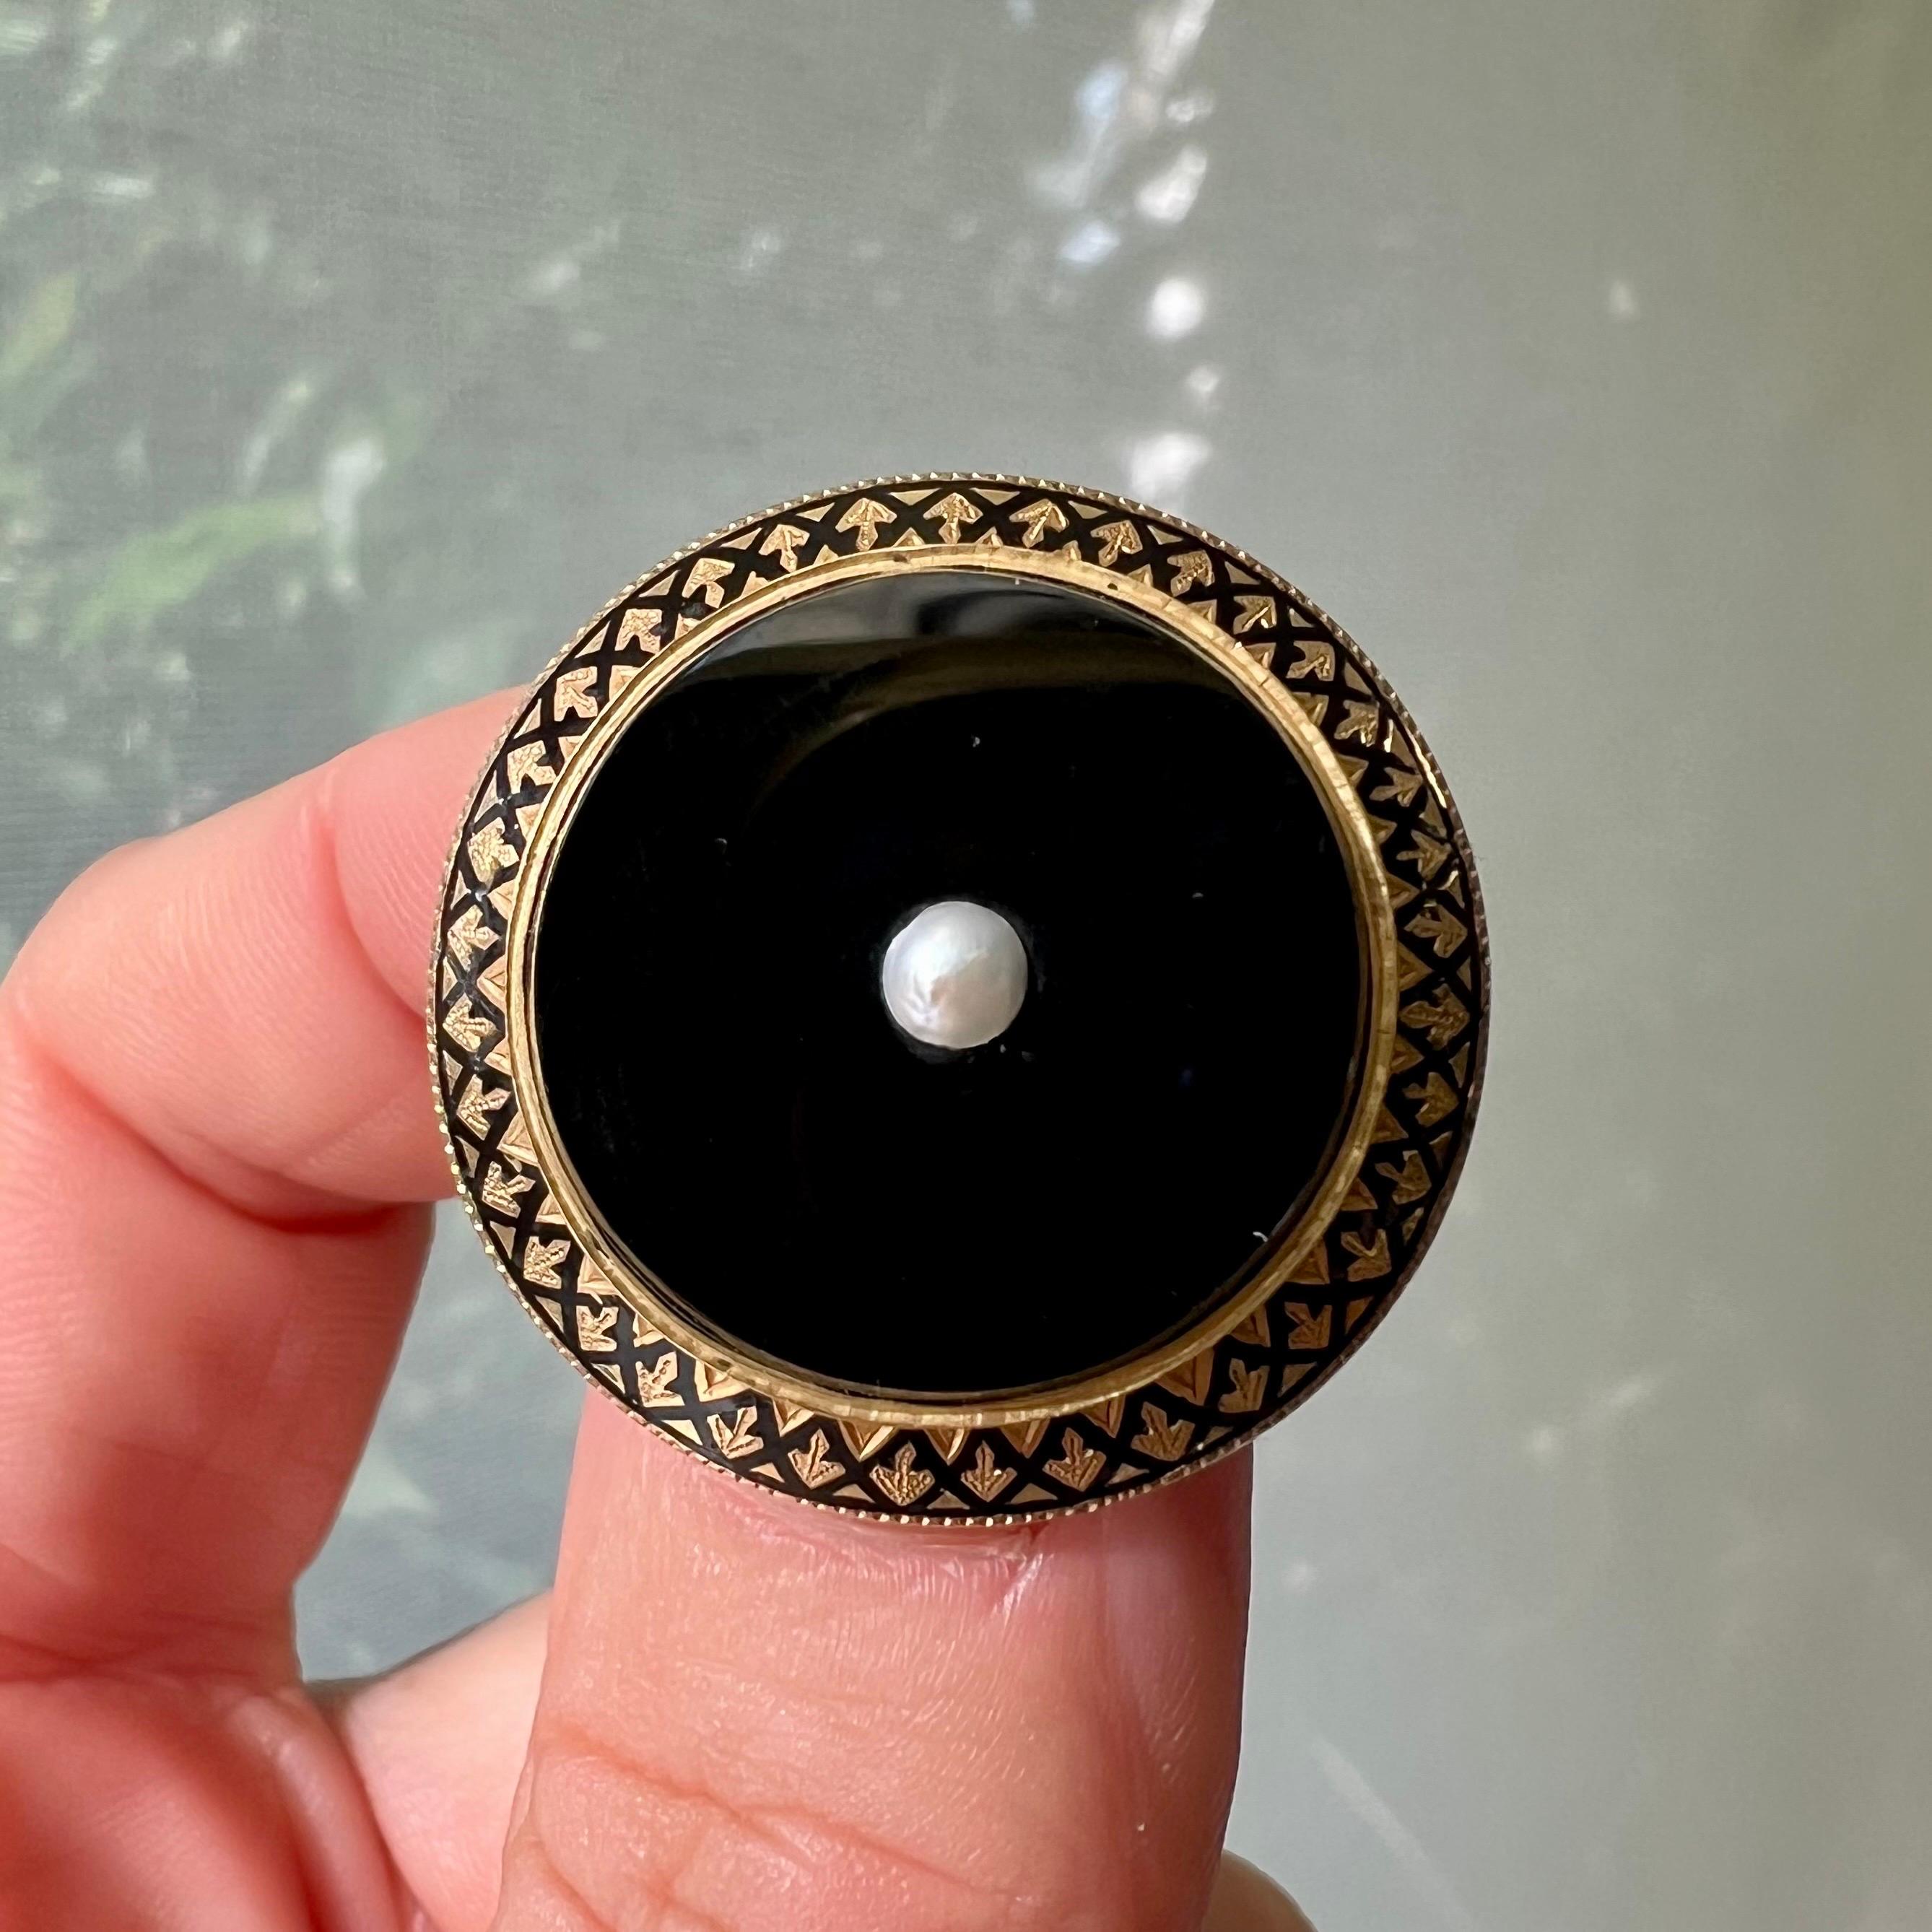 This antique 18 karat gold and enamel round brooch is created with black onyx and set with a seed pearl in the center. The border of the brooch is decorated with black enamel and a gold twisted rim. The pin at the back of the brooch is provided with